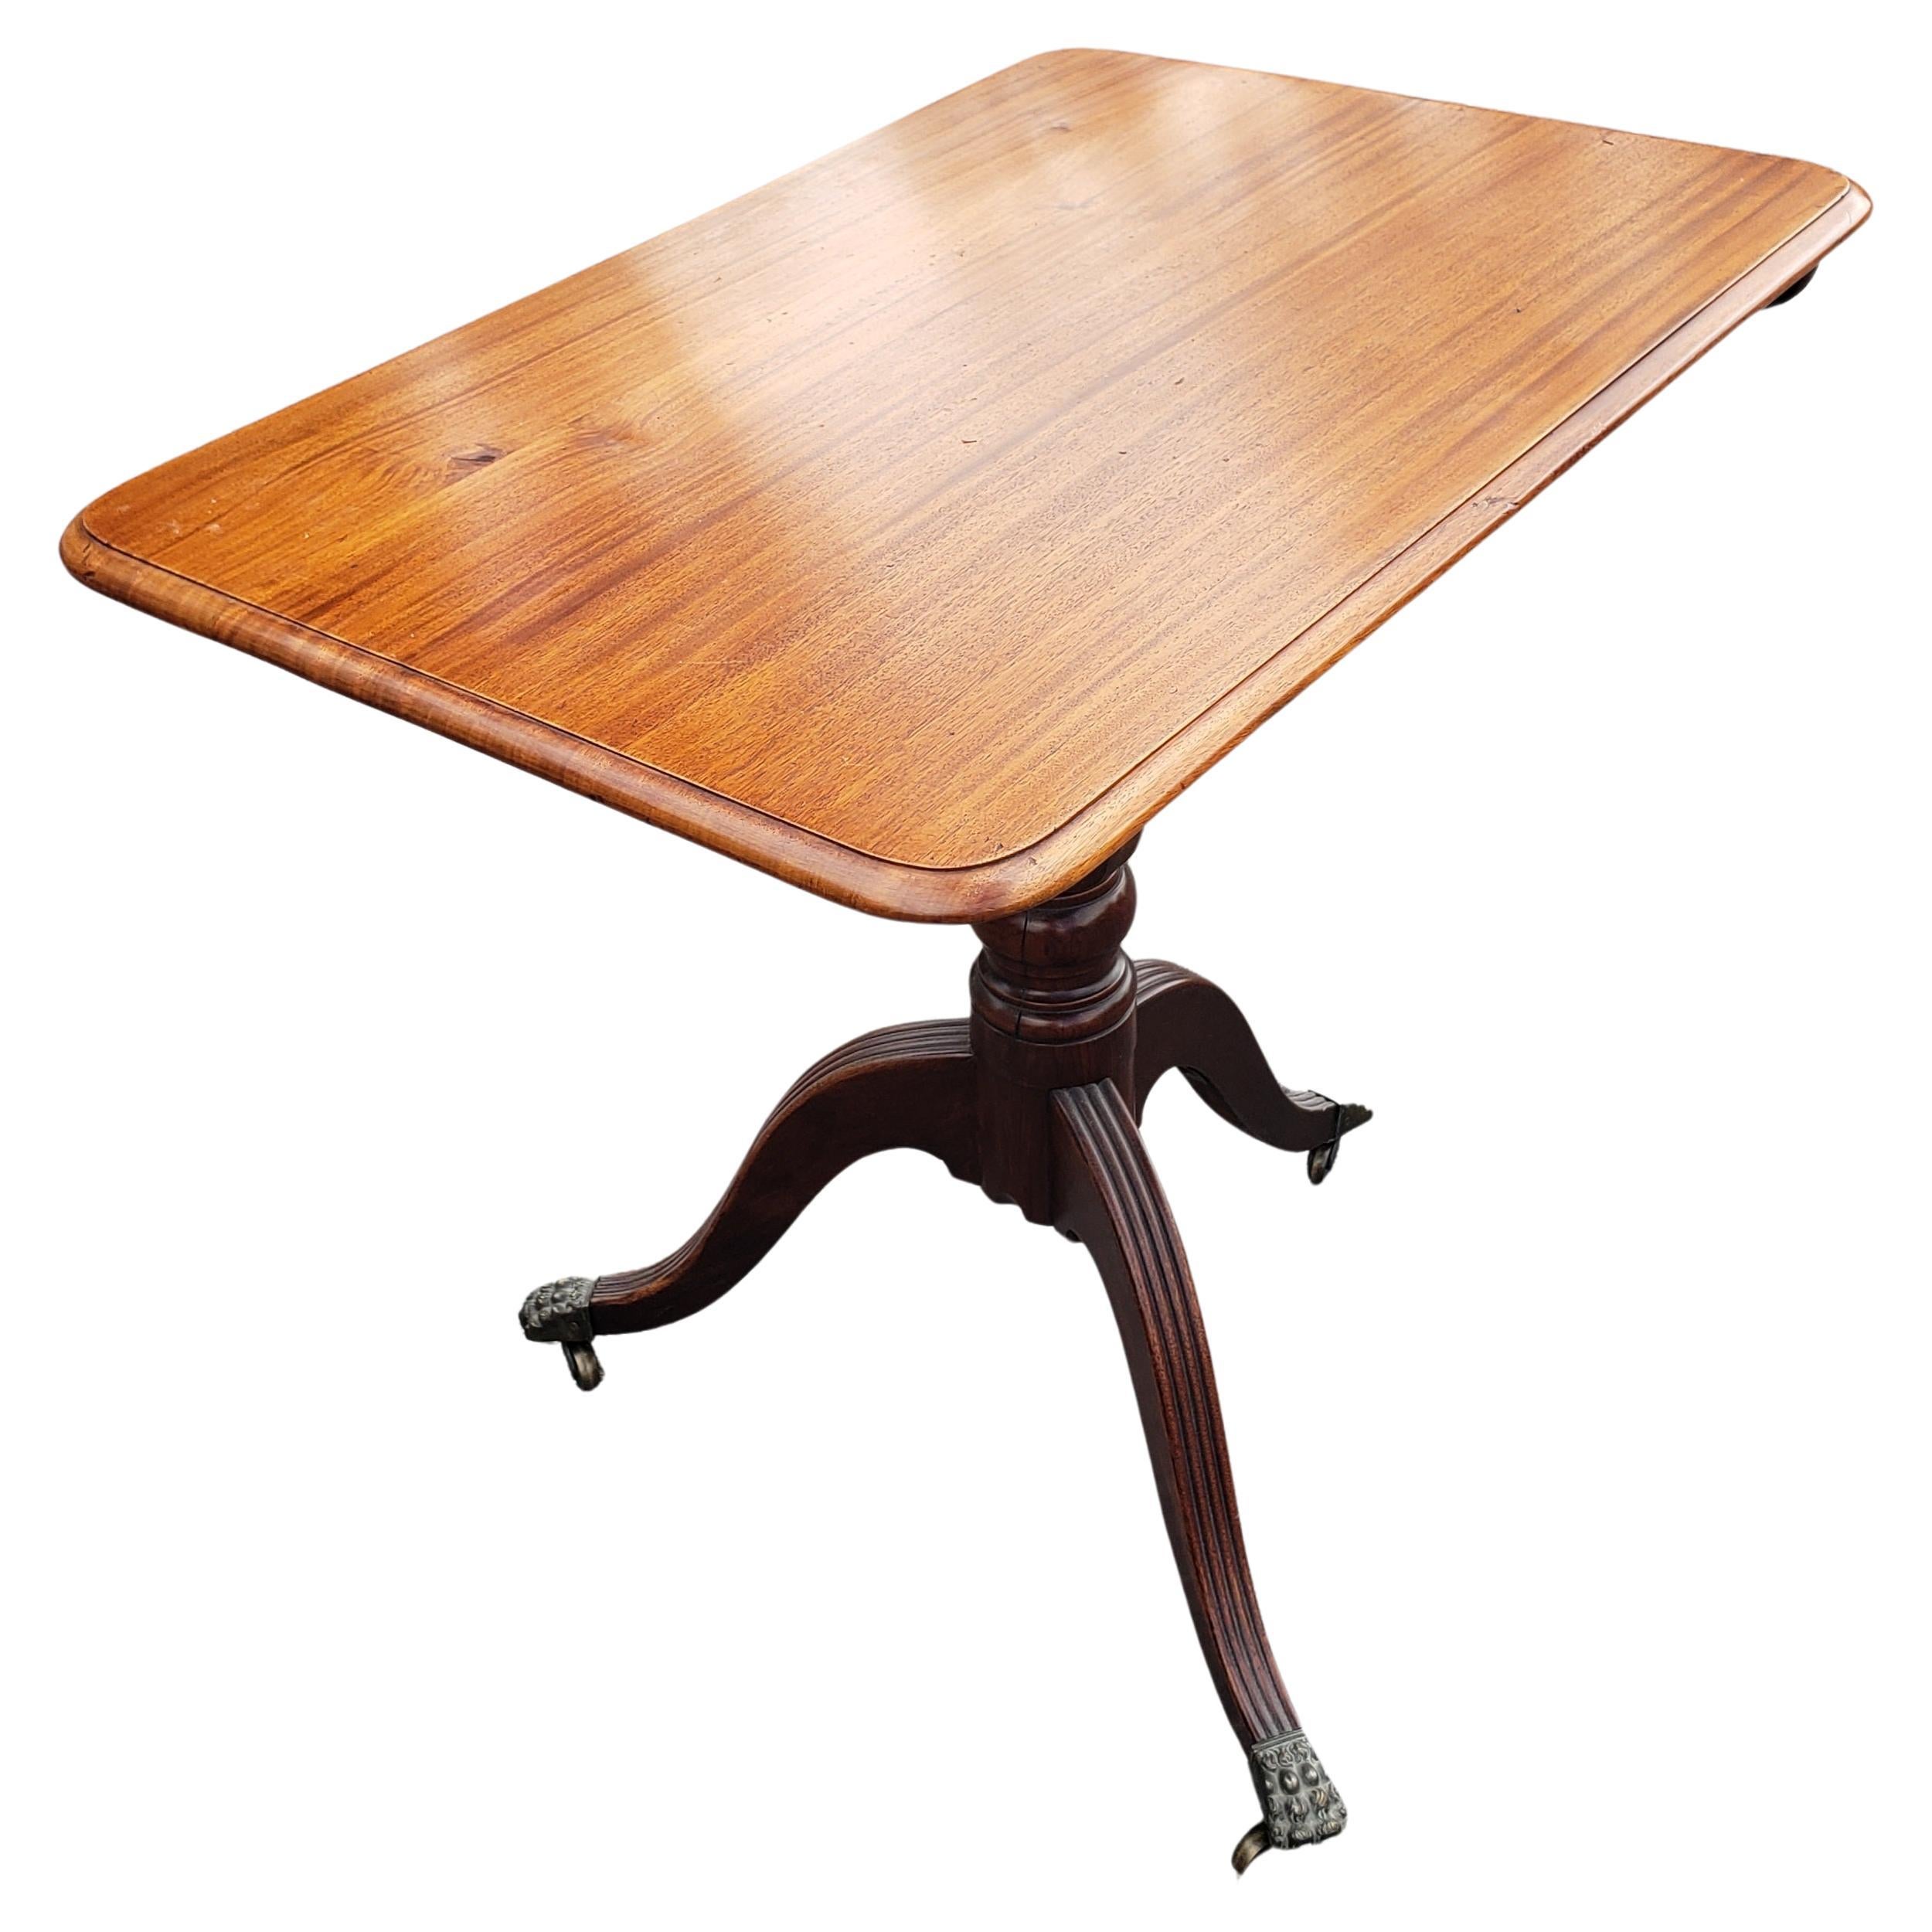 1930s Regency Mahogany Tilt-Top Tea Table with Brass Paw Feet on Wheels In Good Condition For Sale In Germantown, MD